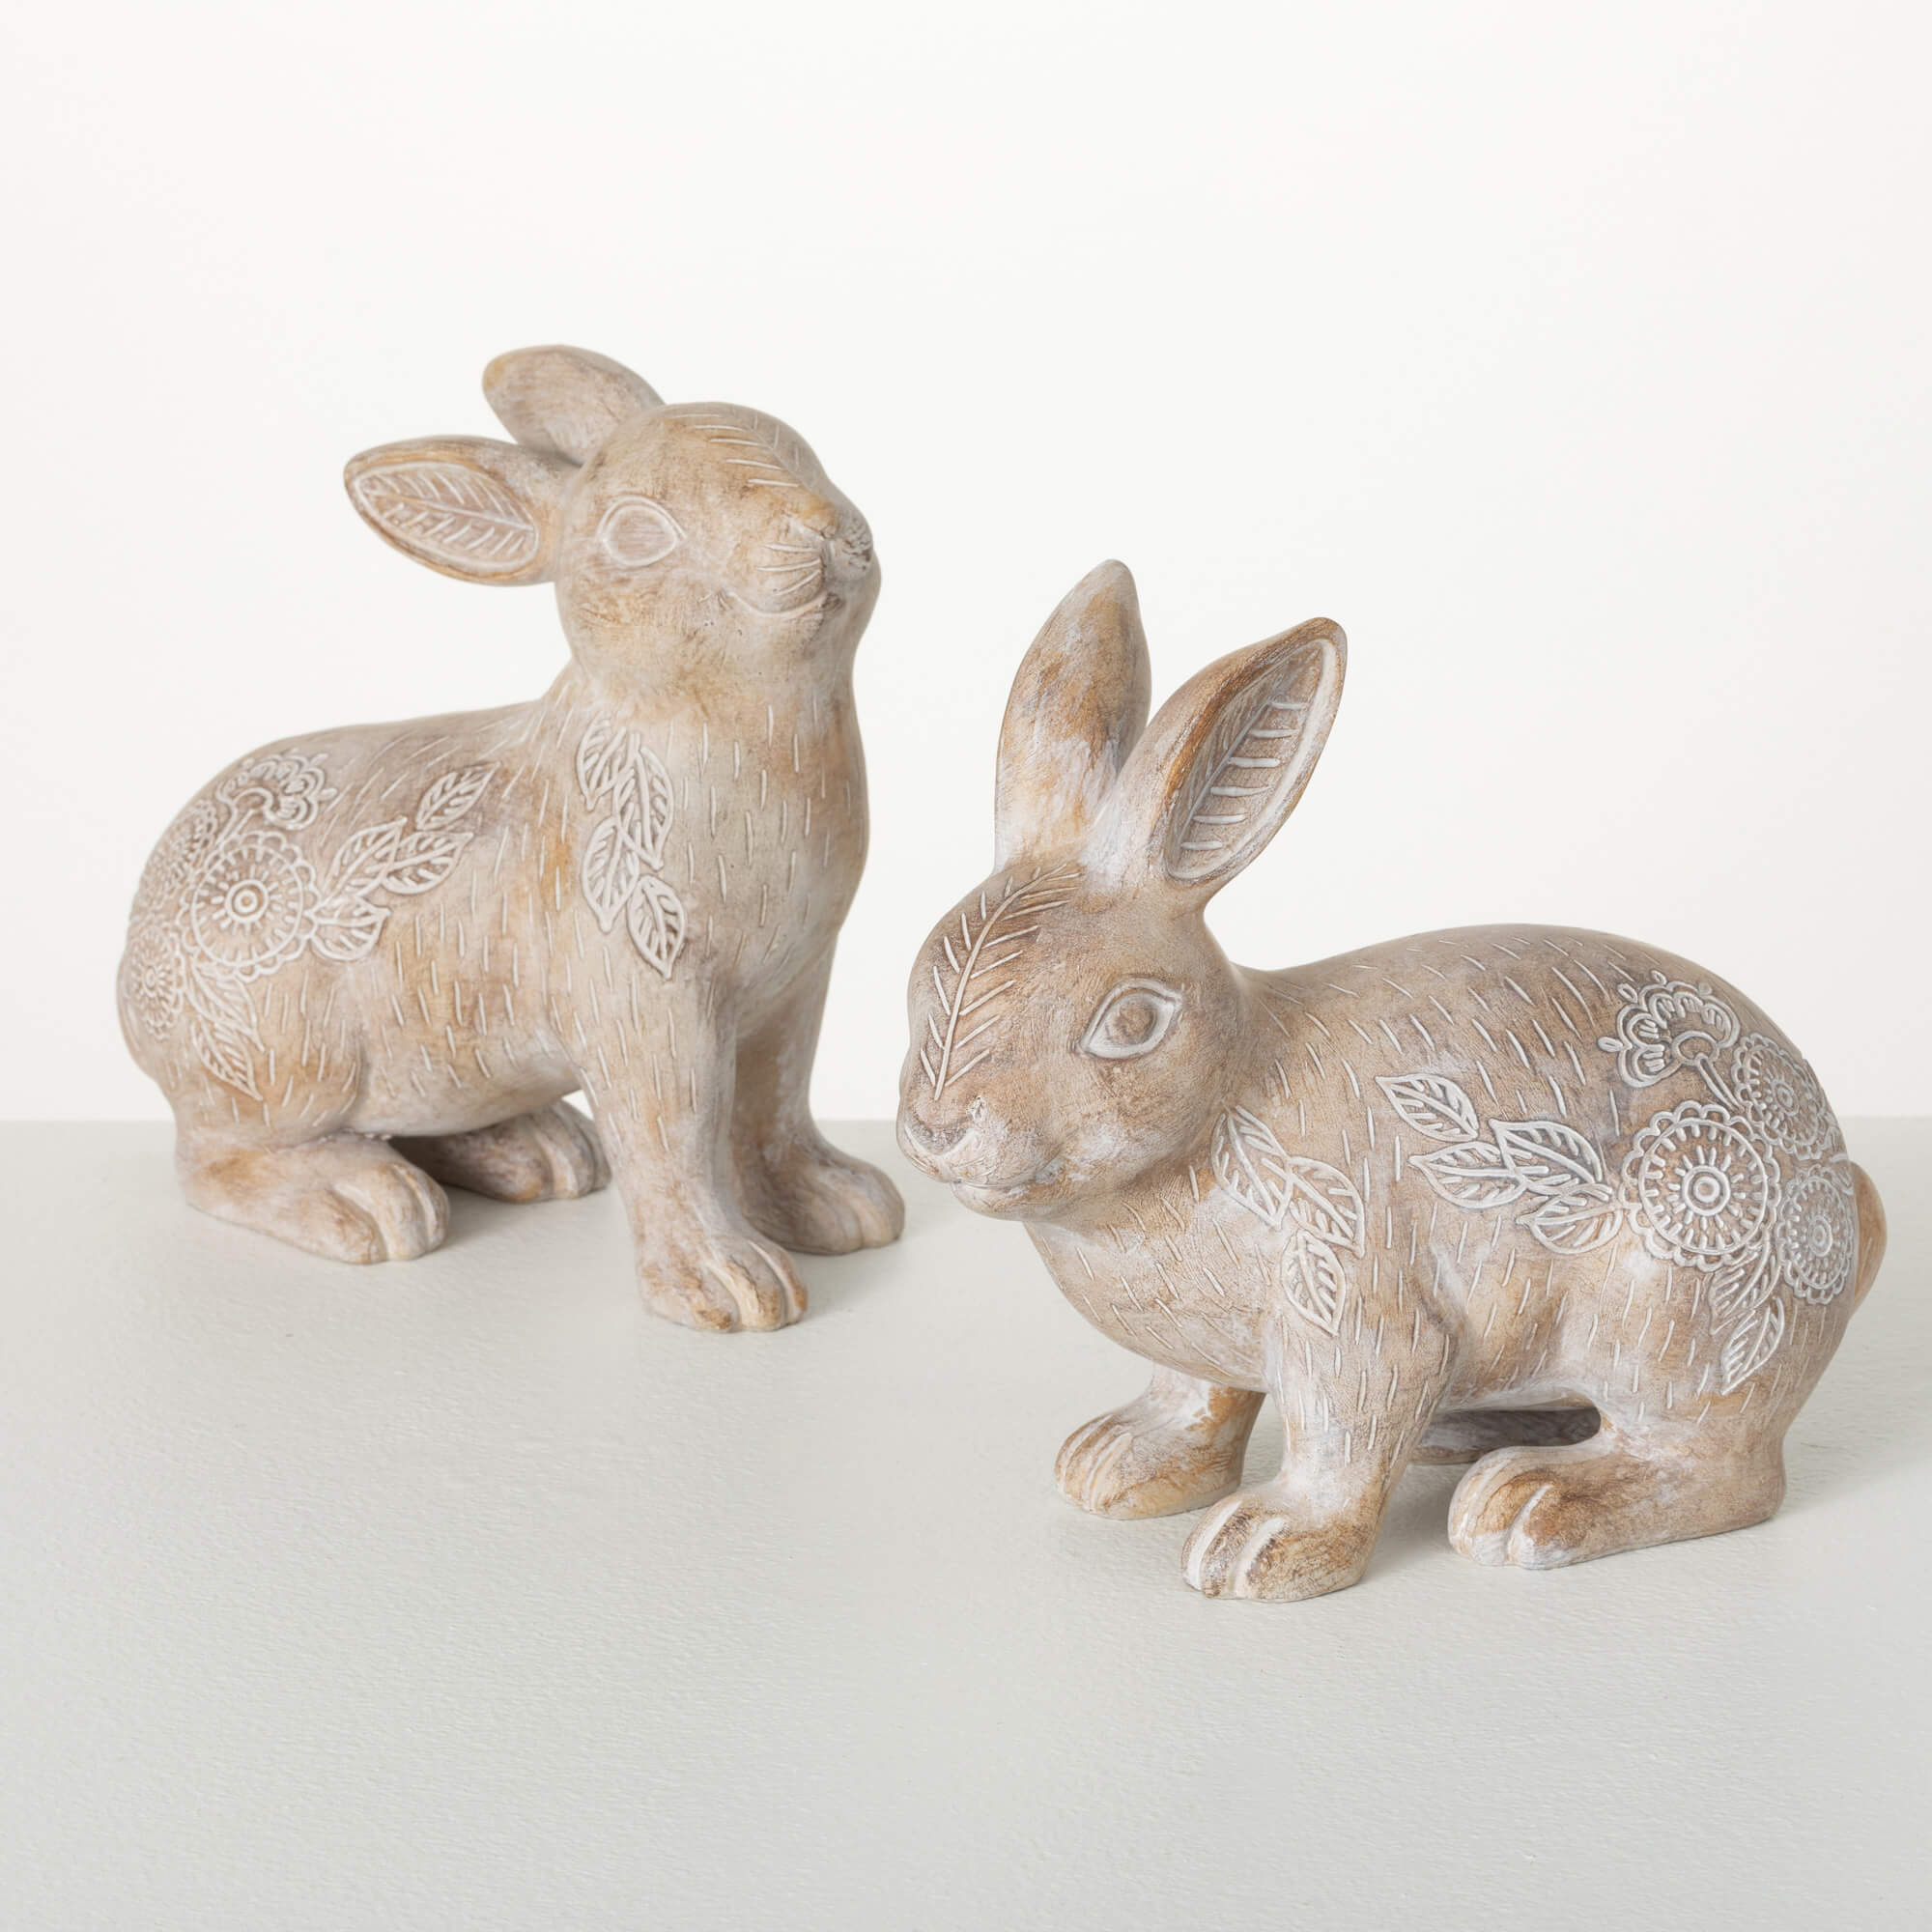 Resting Stance Bunny Statues Elevate Home Decor - Sculptures & Statues